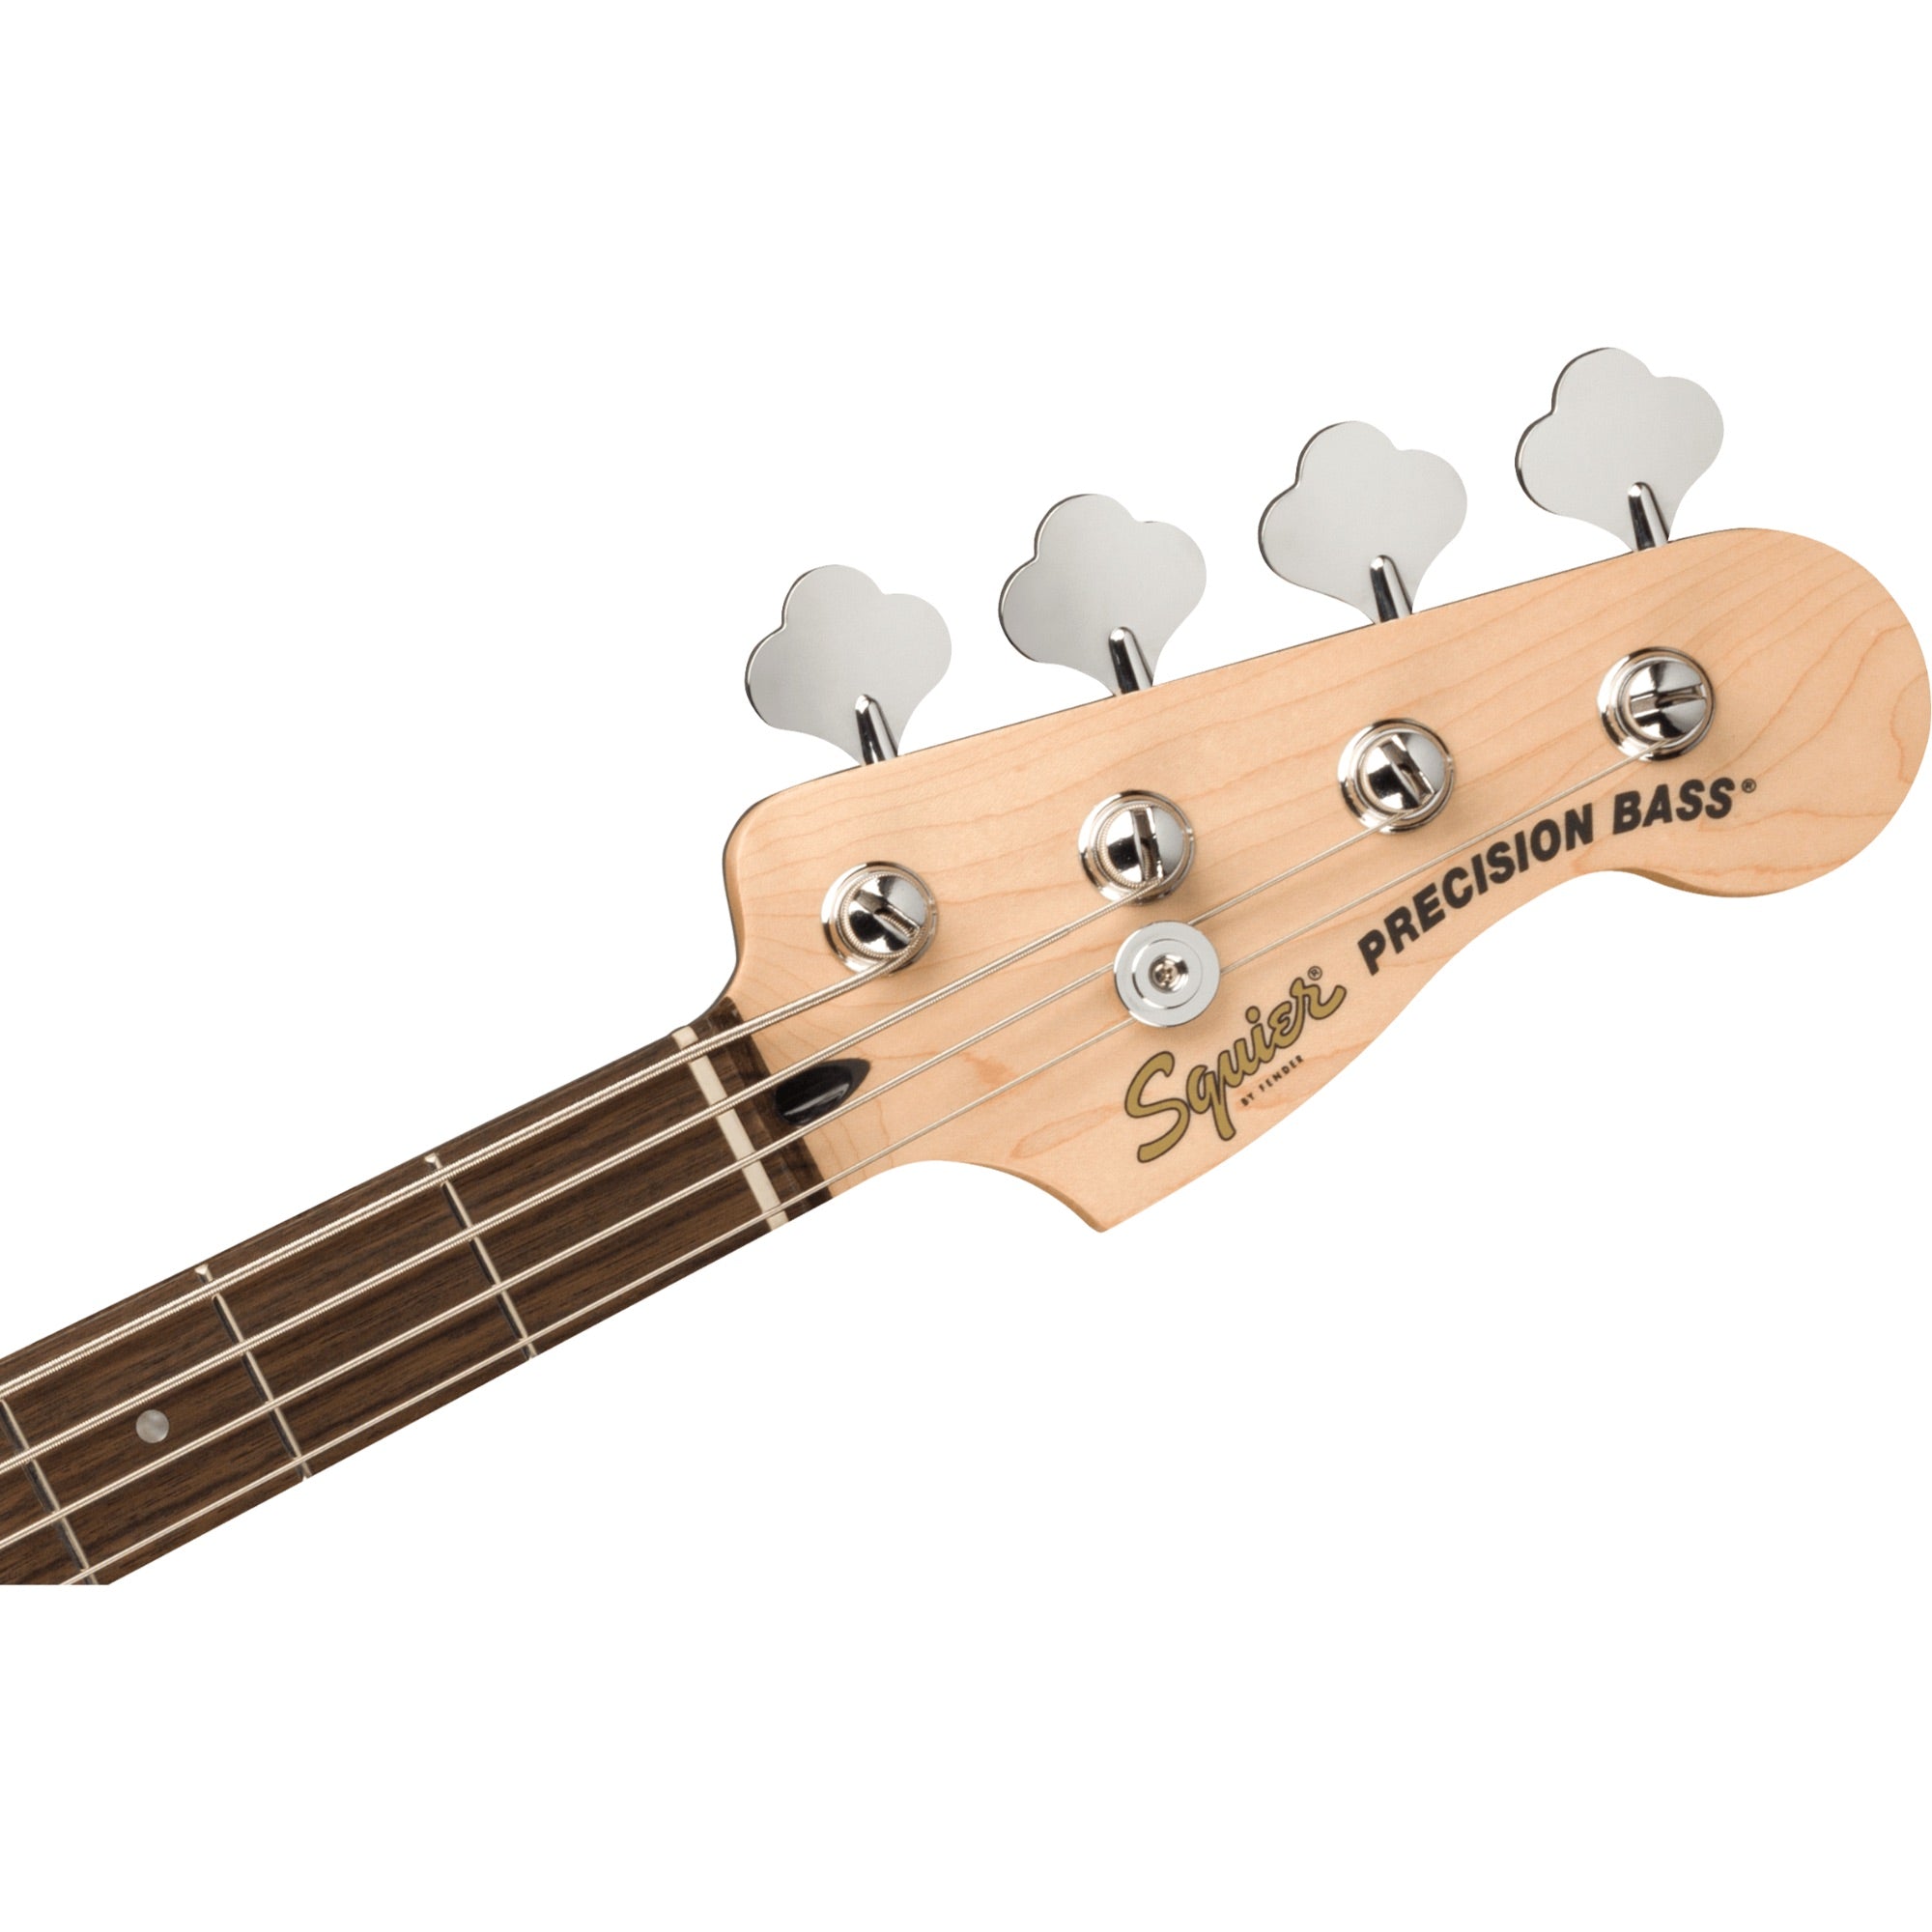 Squier Affinity Precision Bass, Charcoal Frost Metallic